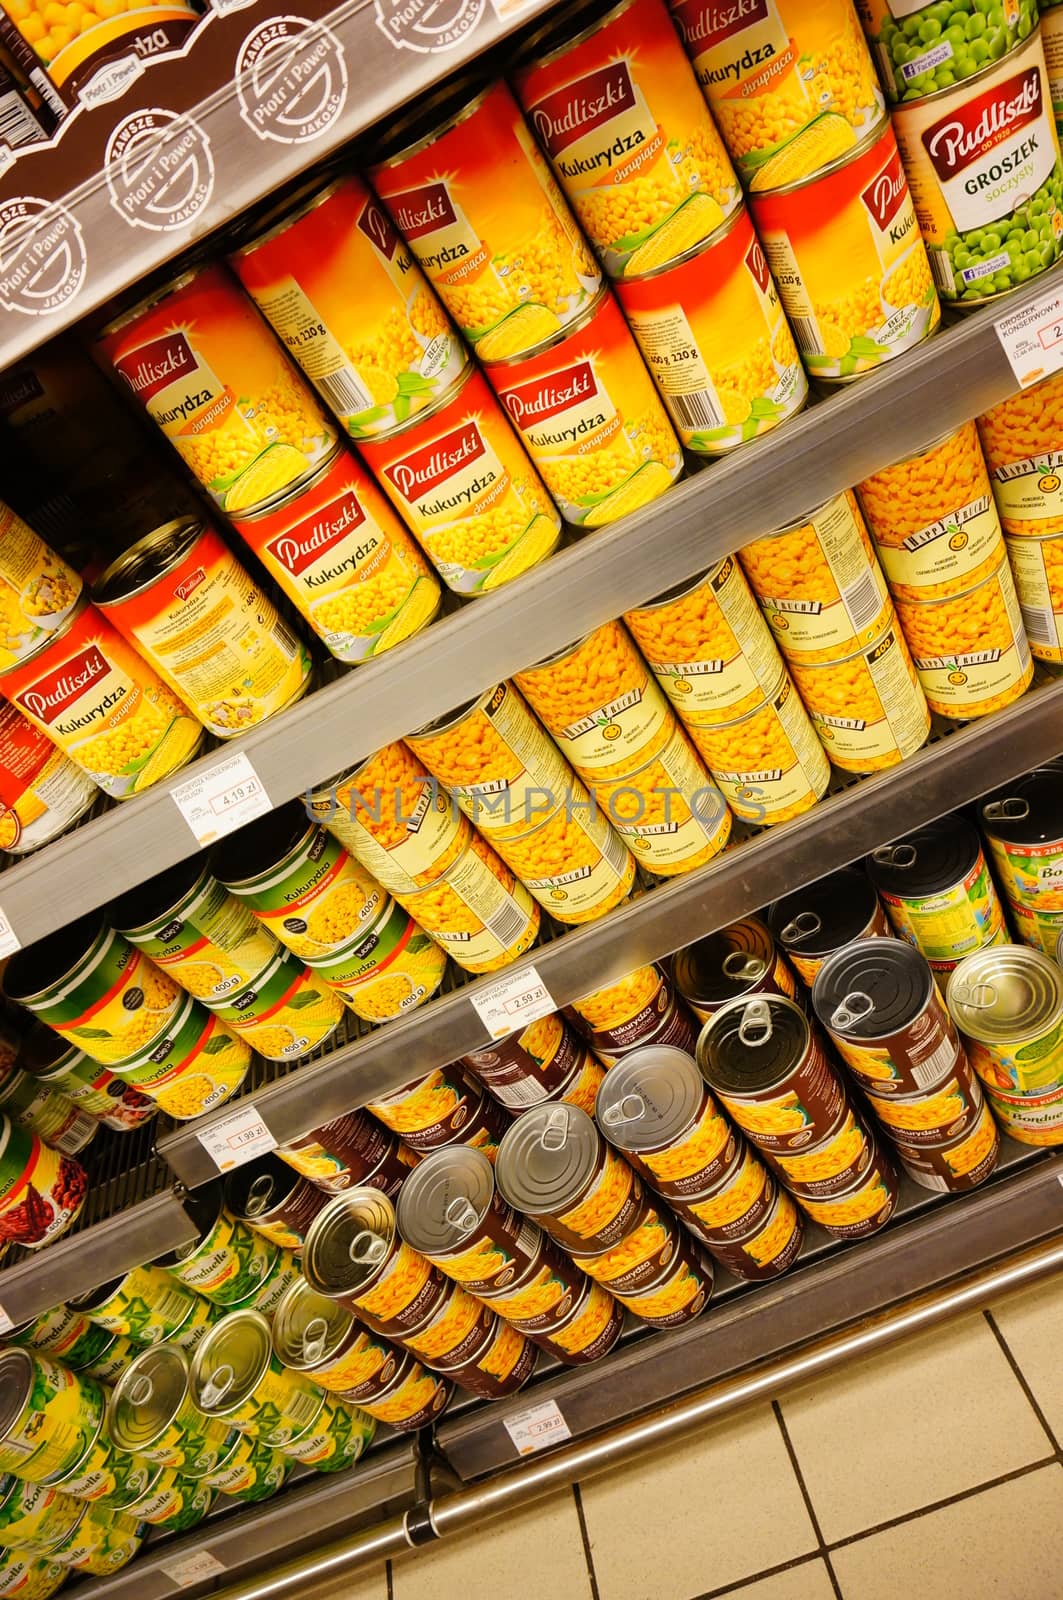 POZNAN, POLAND - JANUARY 27, 2014: Vegetables in cans in a supermarket